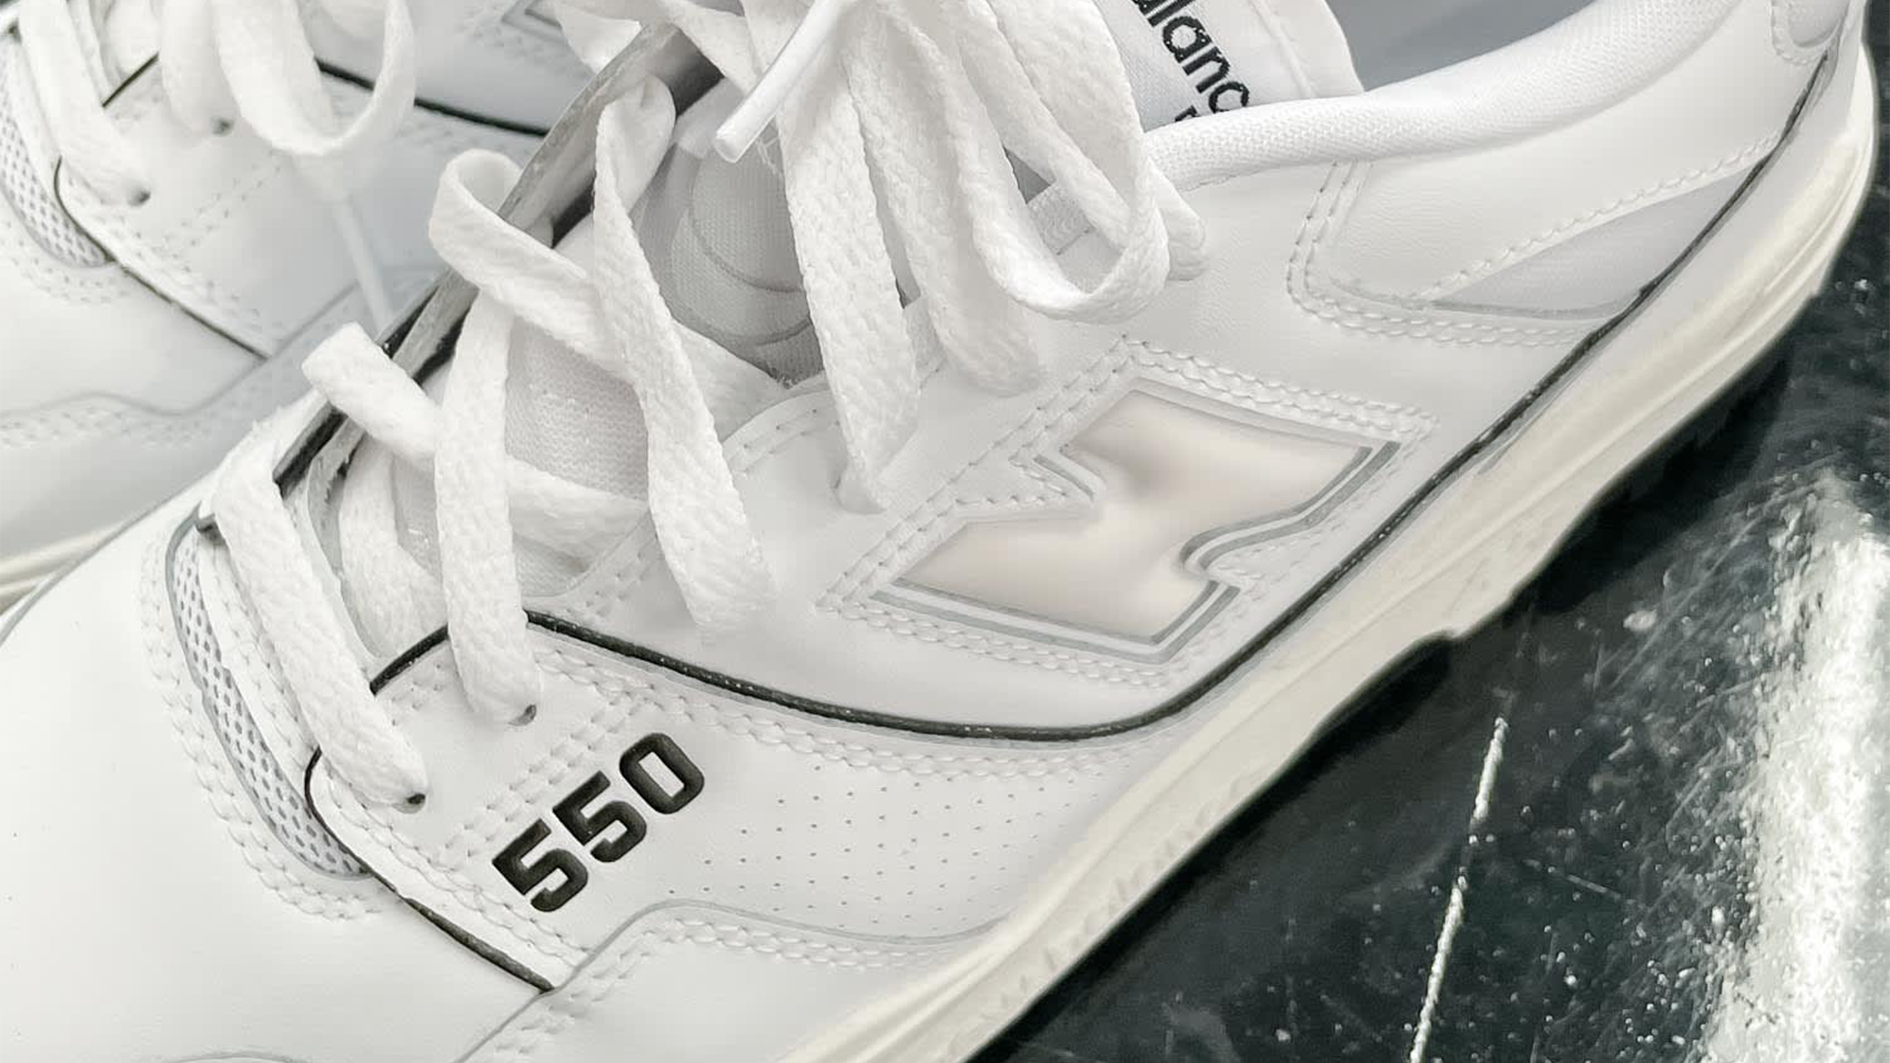 X New Balance 550 Sneakers in White - Comme Des Garcons Homme